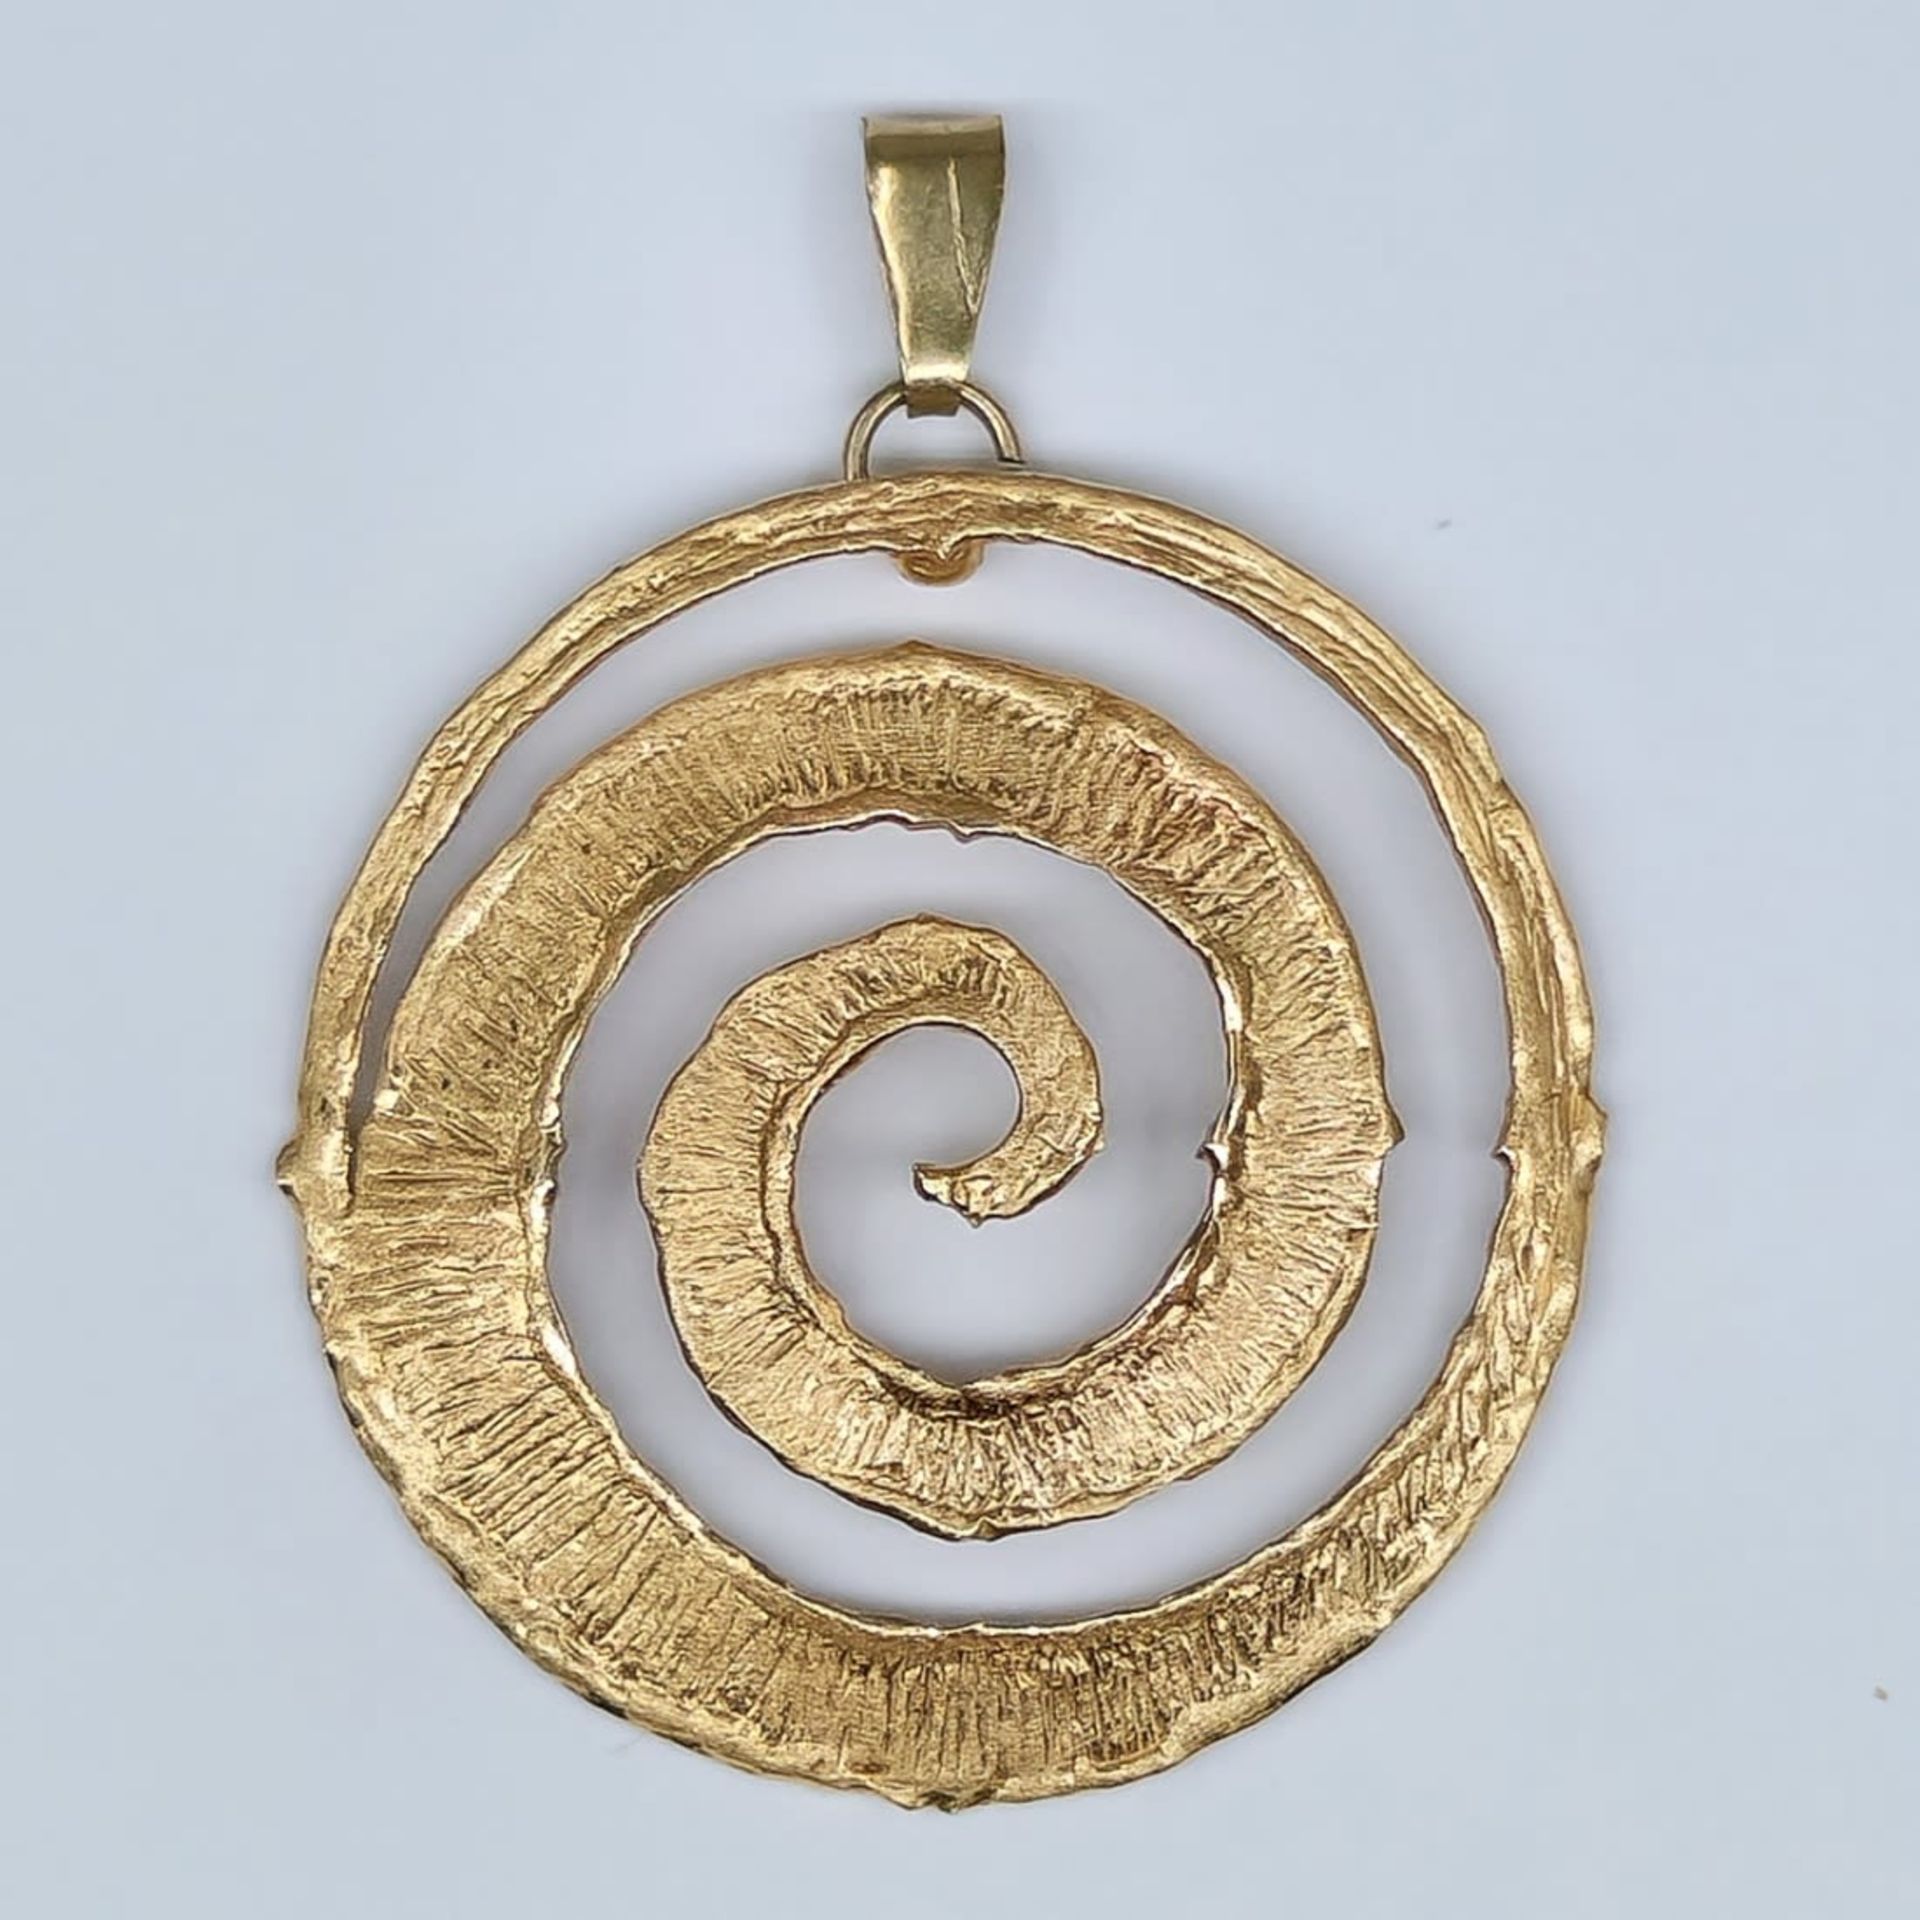 14K gold pendant of a spiral shape, signed, Weight: 5.78 grams, Diameter: 4 cm, Height including the